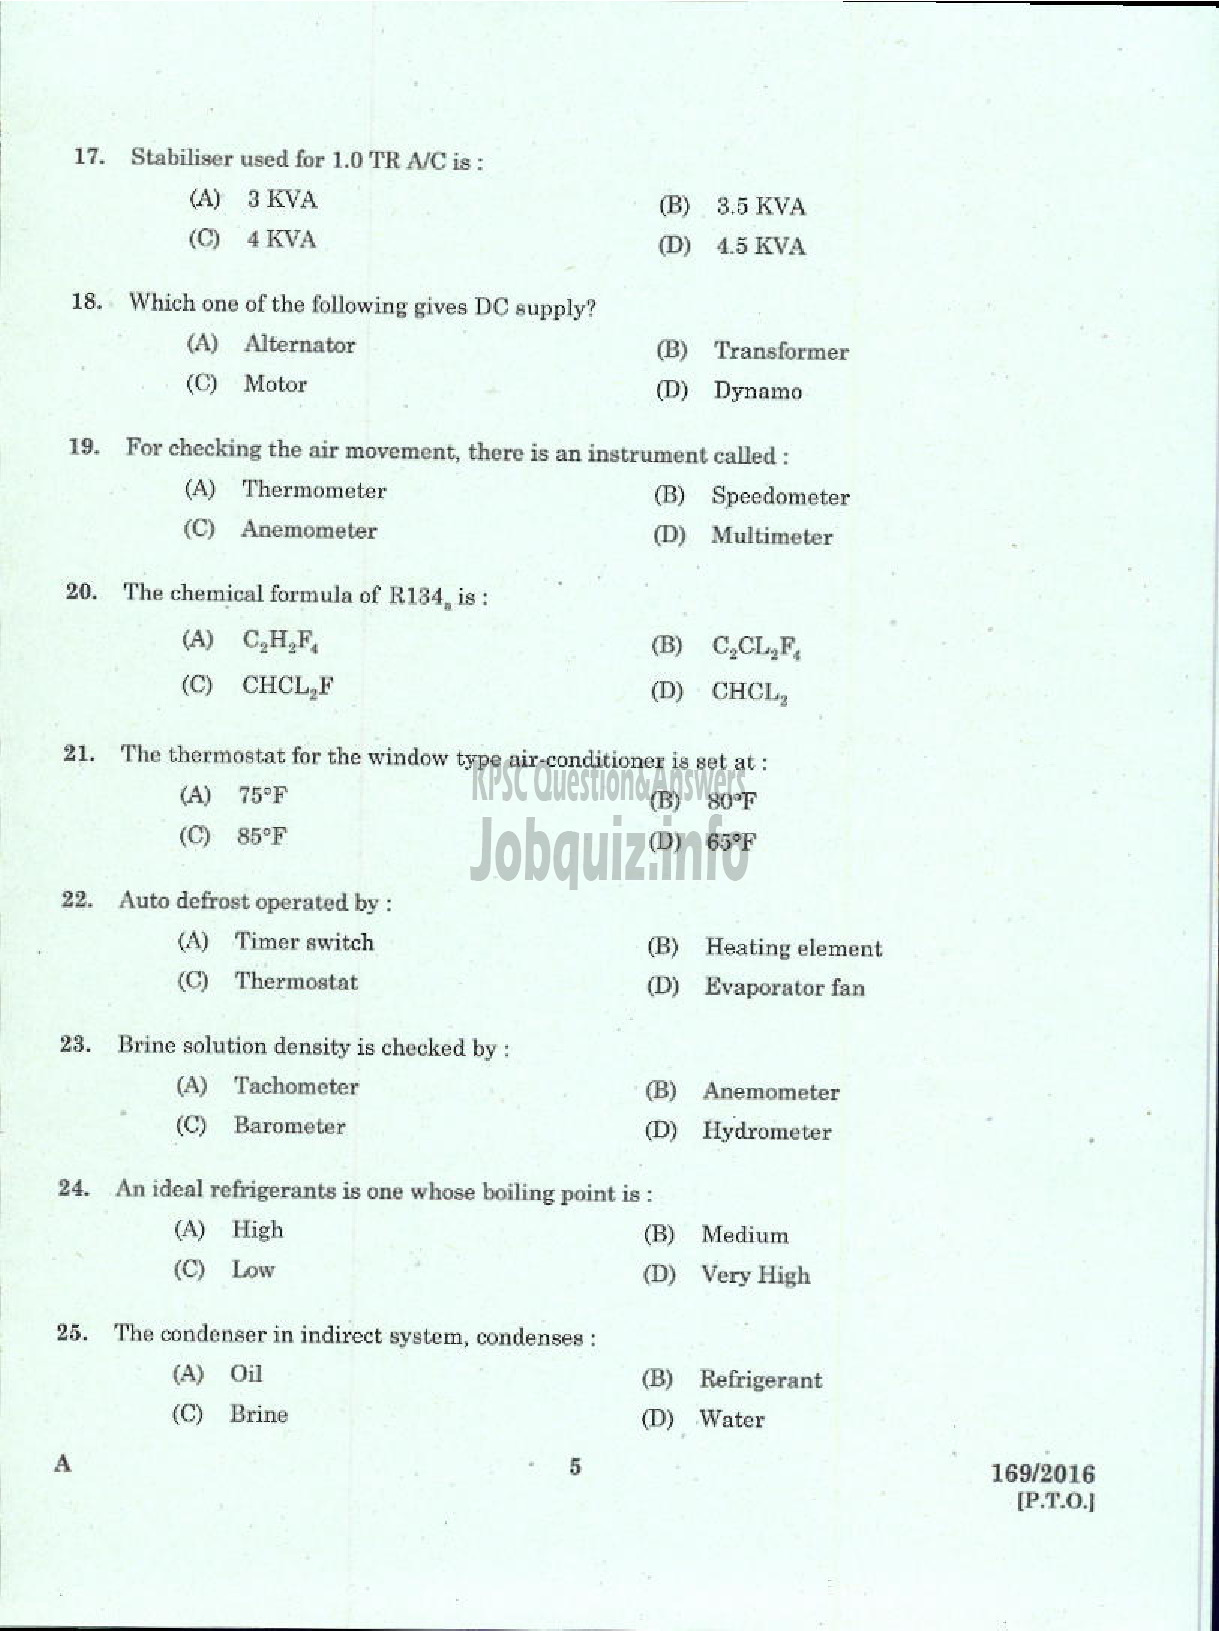 Kerala PSC Question Paper - TRADESMAN REFRIGERATION AND AIR CONDITIONING TECHNICAL EDUCATION-3